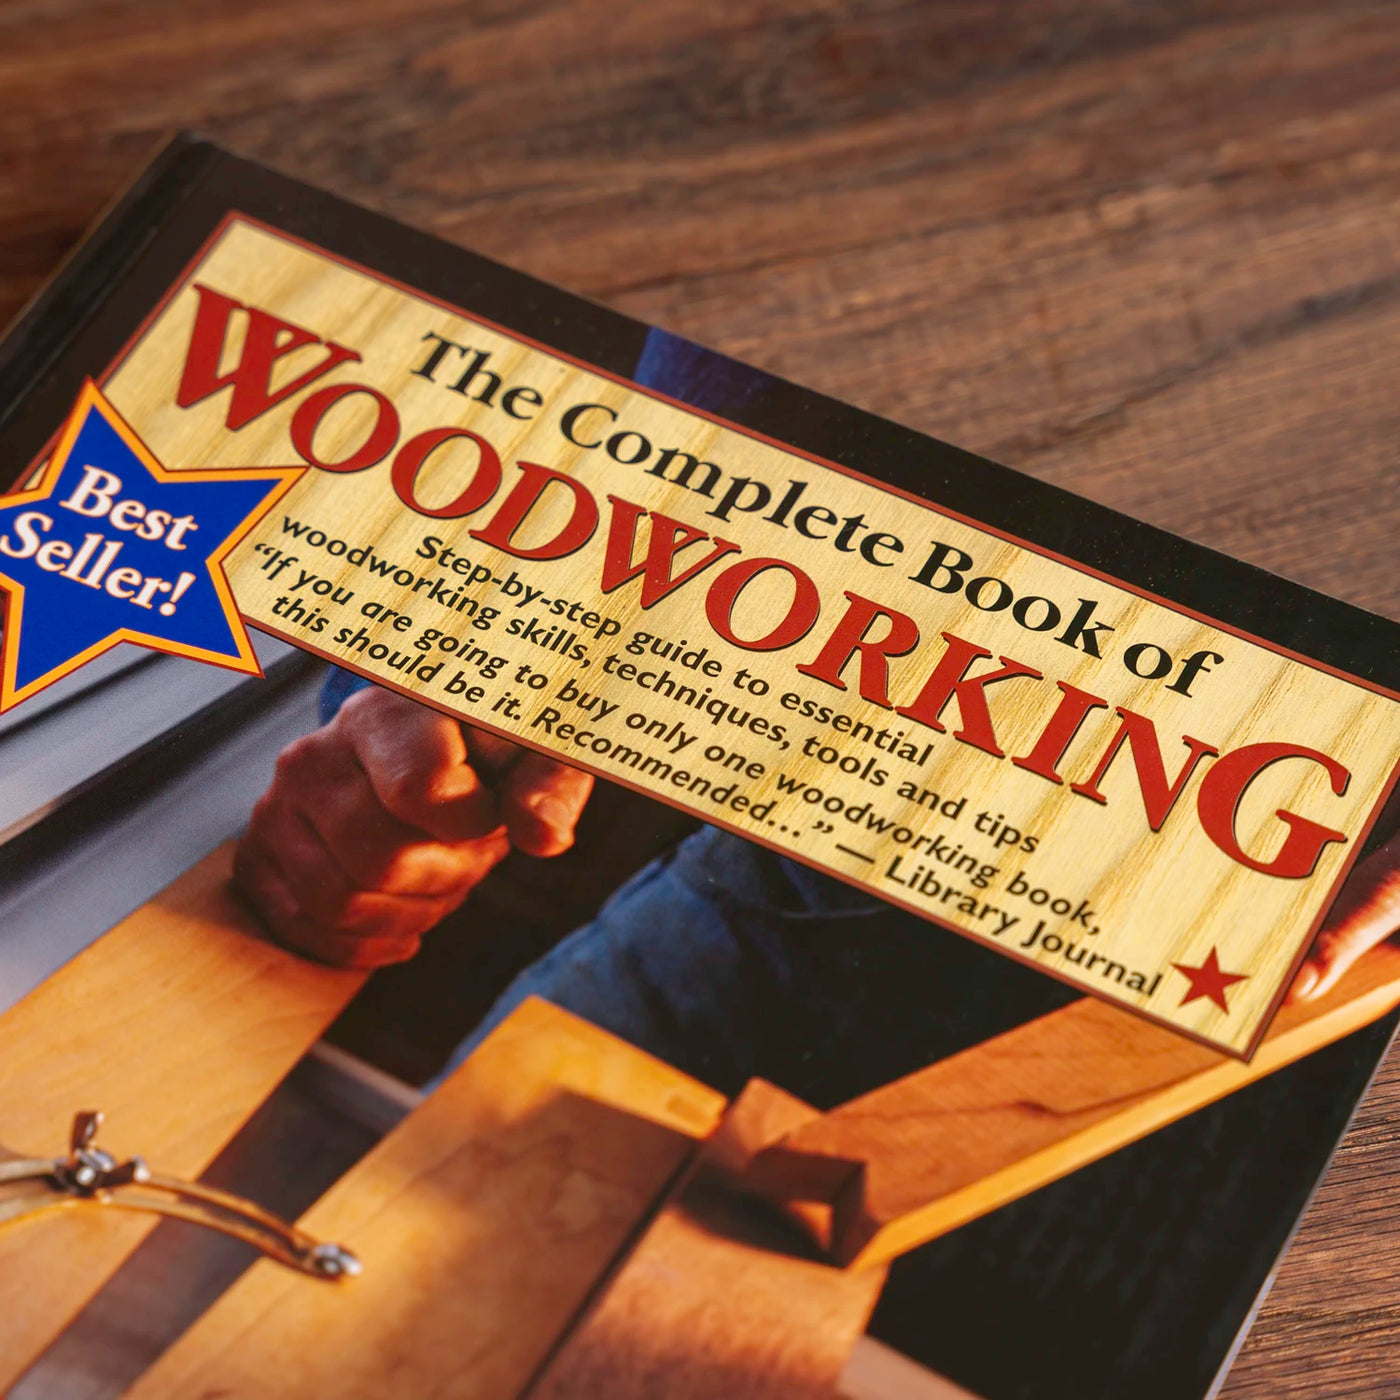 The Complete Book of Woodworking